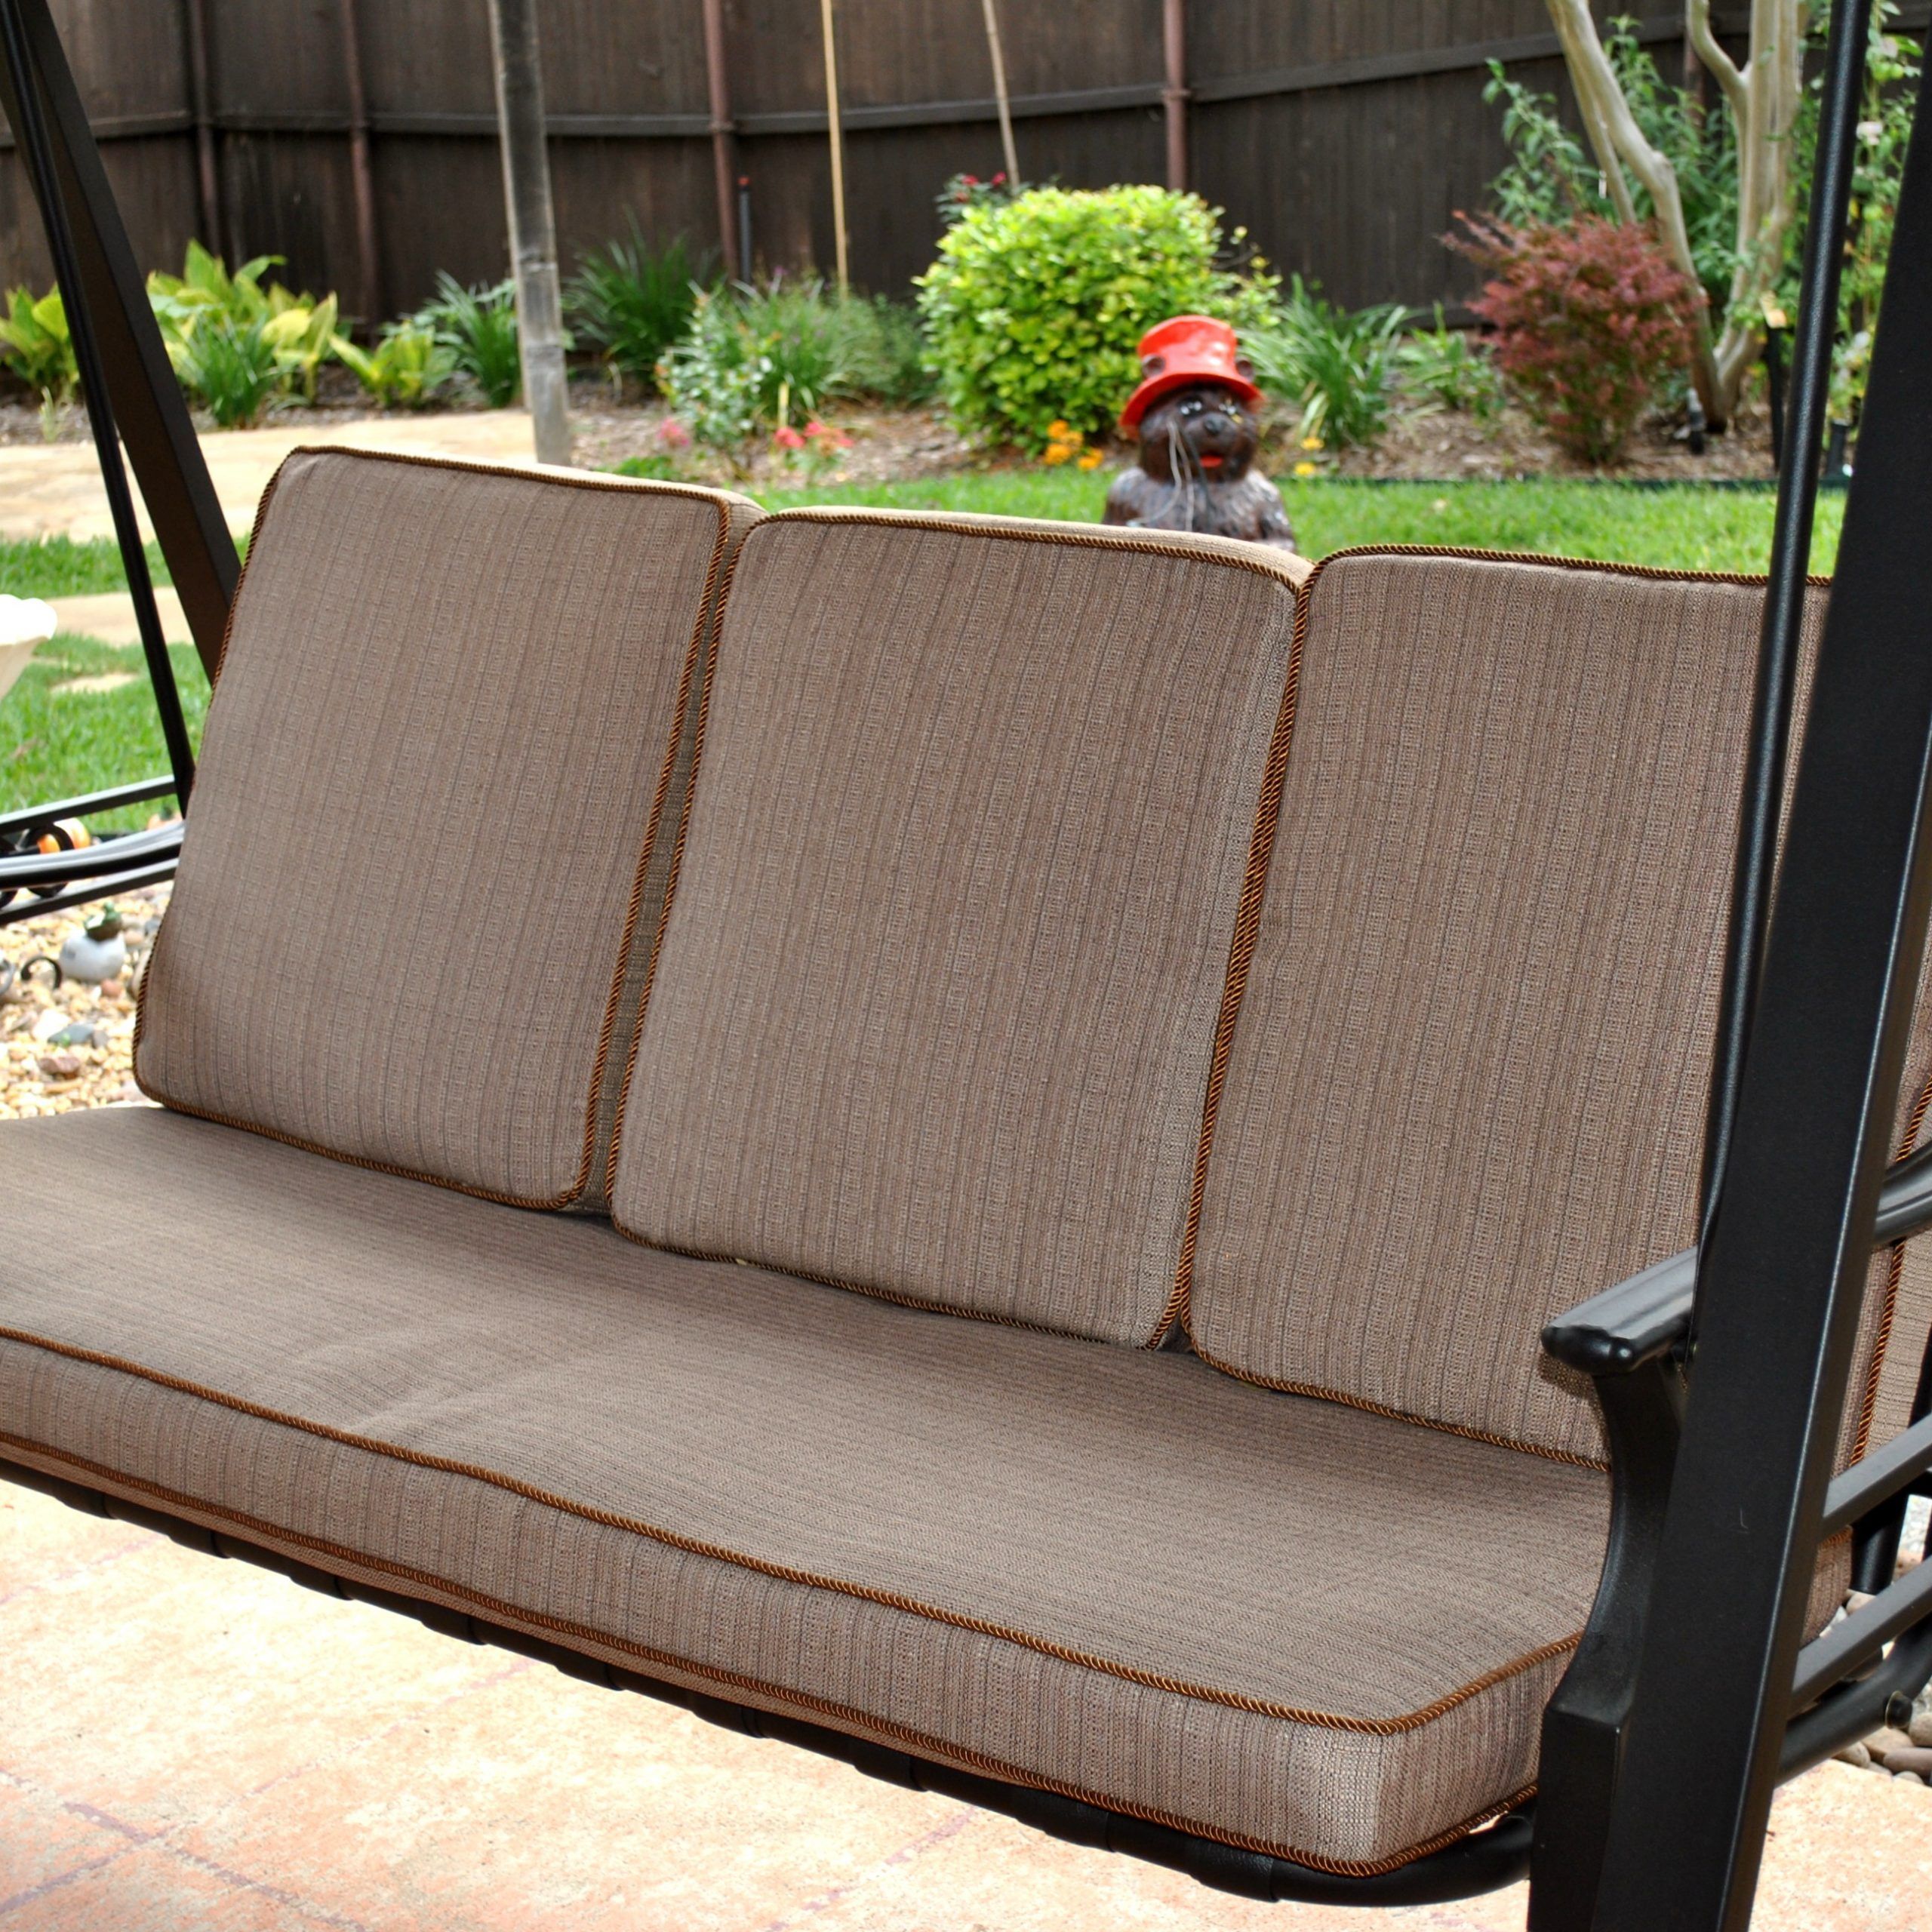 Lovely Outside Swing Cushions Cushion Ideas 261942 – Cushion Intended For Deluxe Cushion Sunbrella Porch Swings (View 17 of 25)